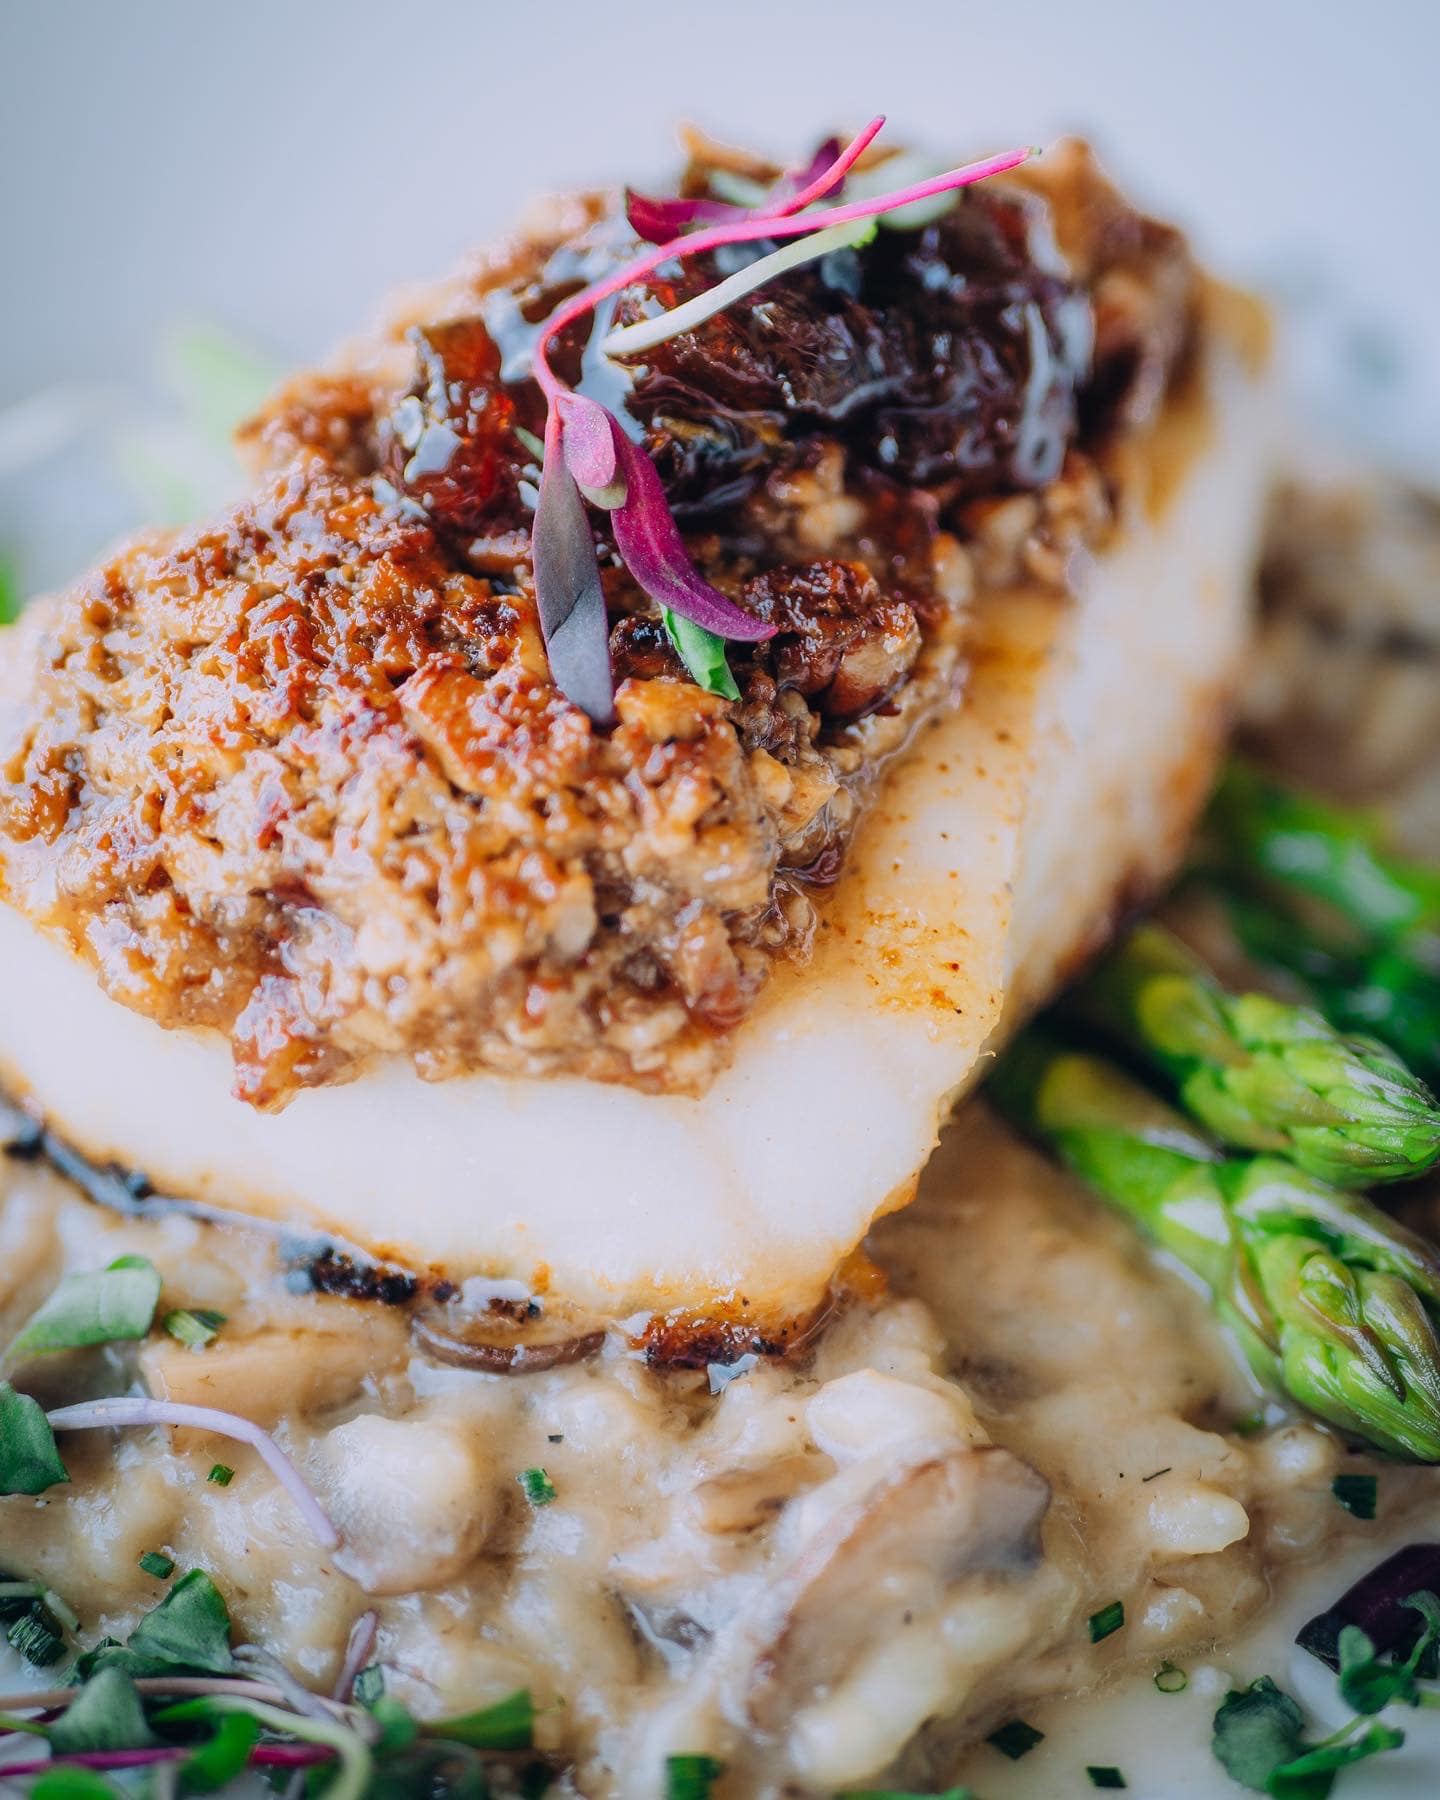 A salmon filet sits on a bed of mushroom risotto